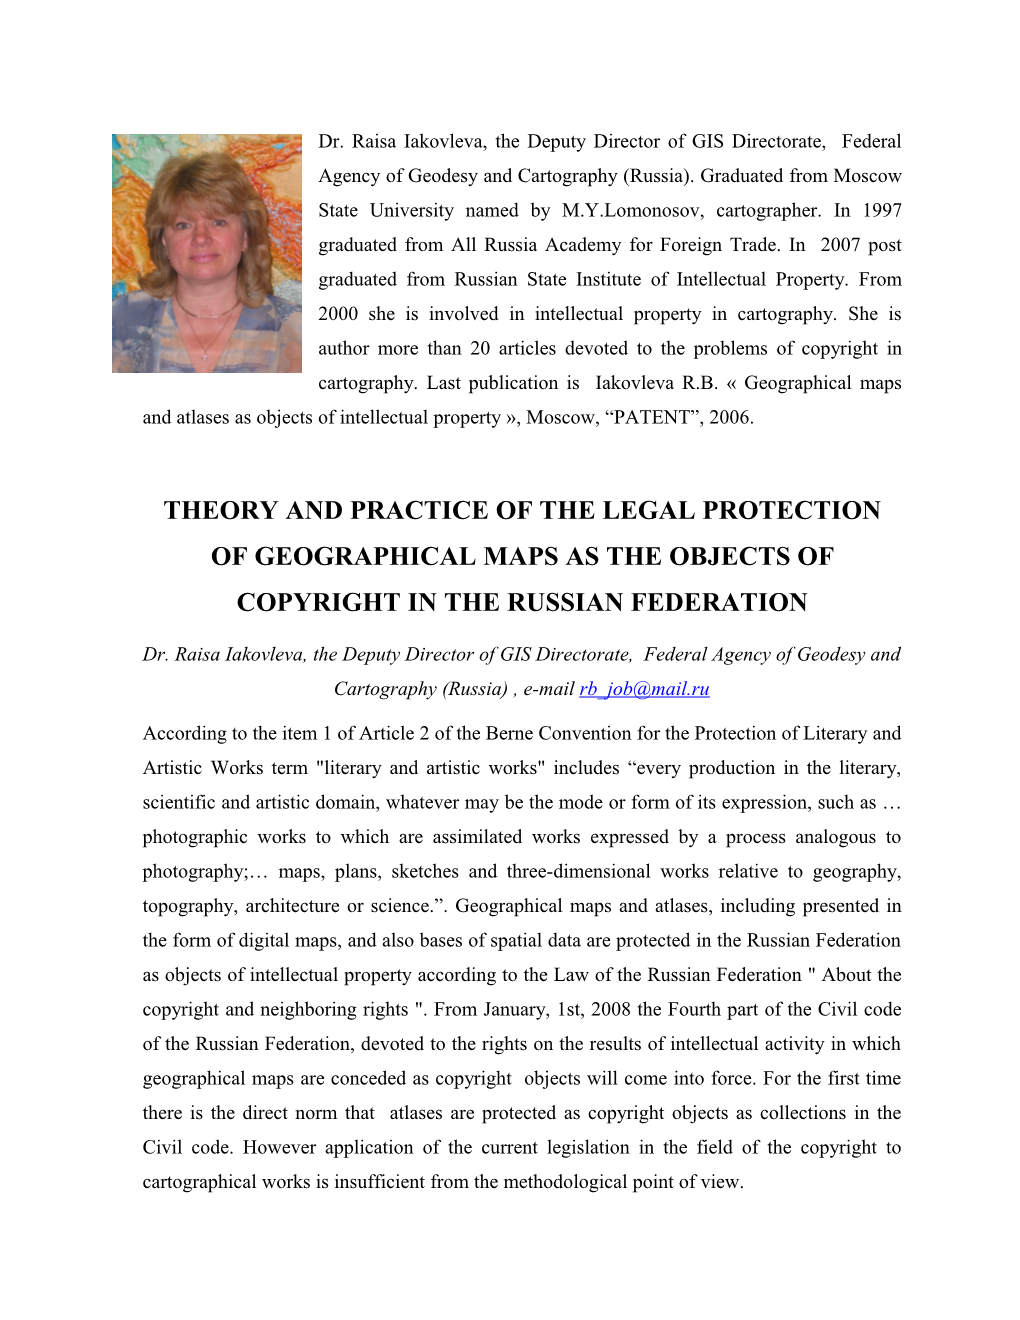 The Theory and Practice of a Legal Protection of Geographical Cards Maps As Objects Of